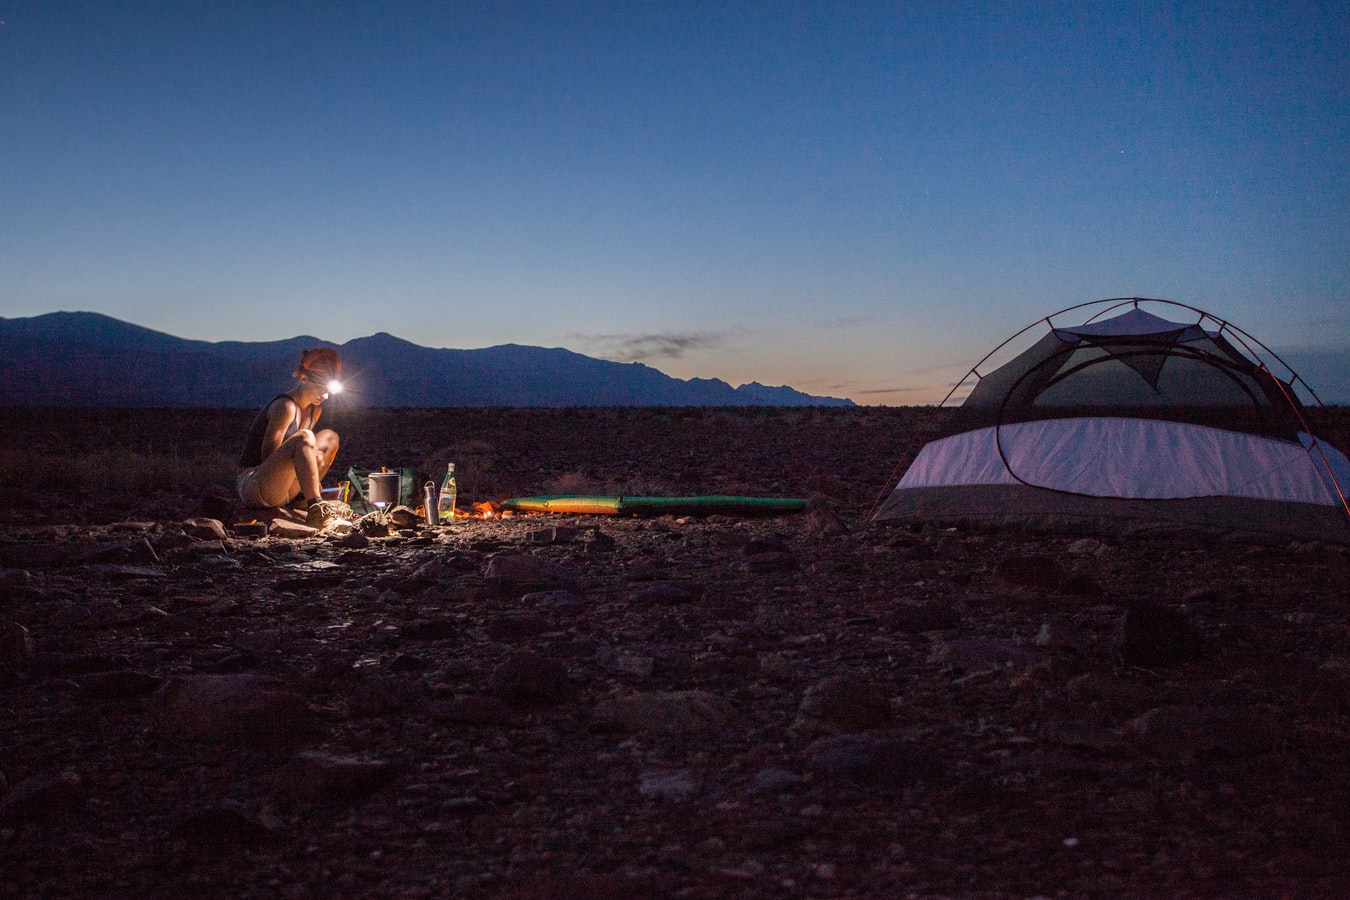 A Checklist of Essential Items For a Safe and Enjoyable Camping Trip